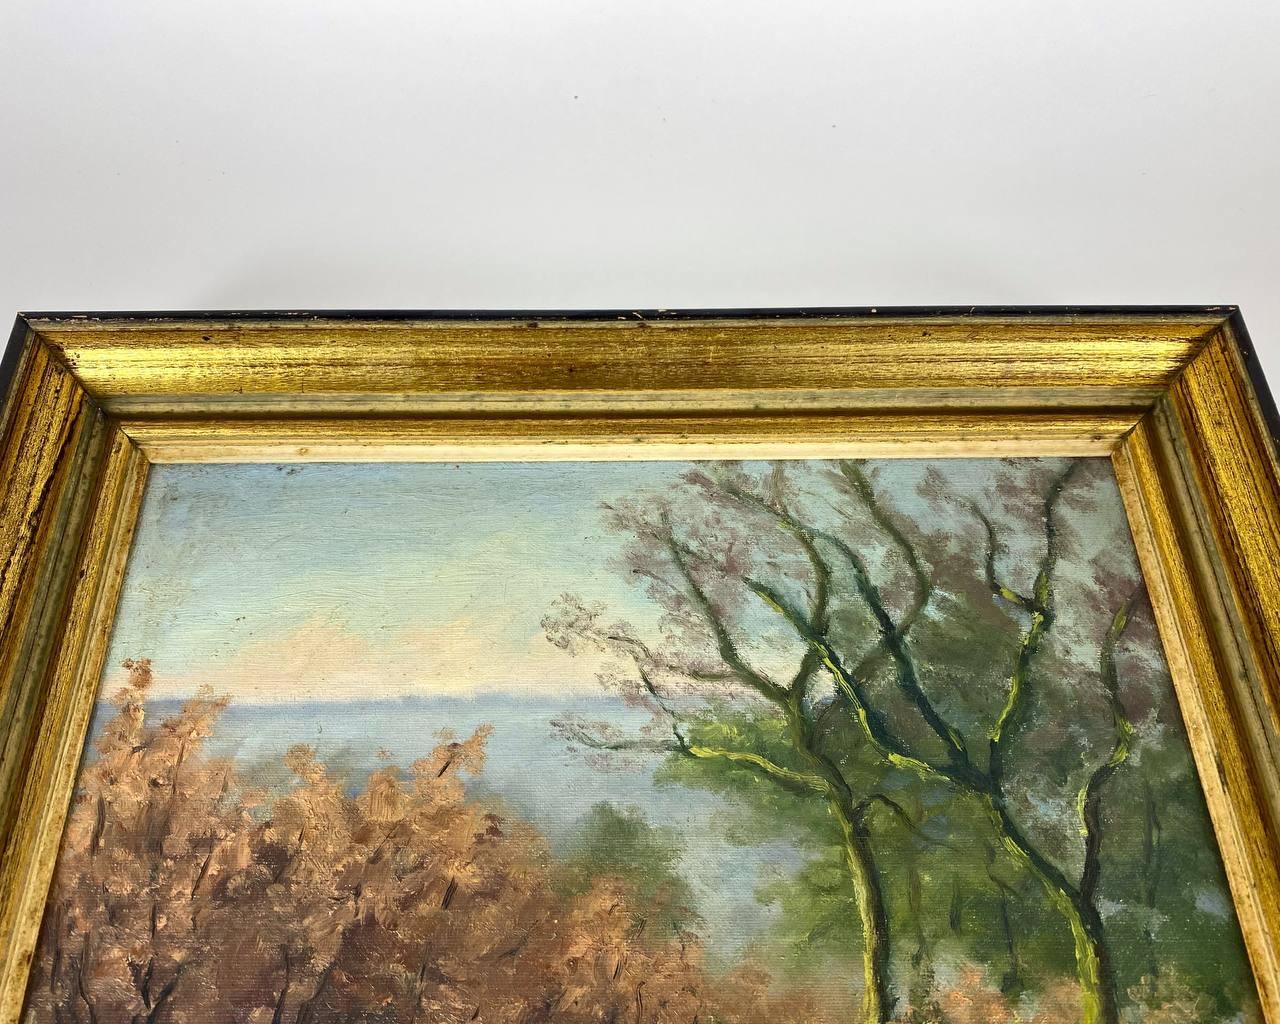 Vintage oil painting on canvas.

Original authentic landscape depicting three elements - water, sky and earth. The work is framed in a Classic wooden frame. The color scheme is dominated by green, earthy tones. 

The painting depicts a pond